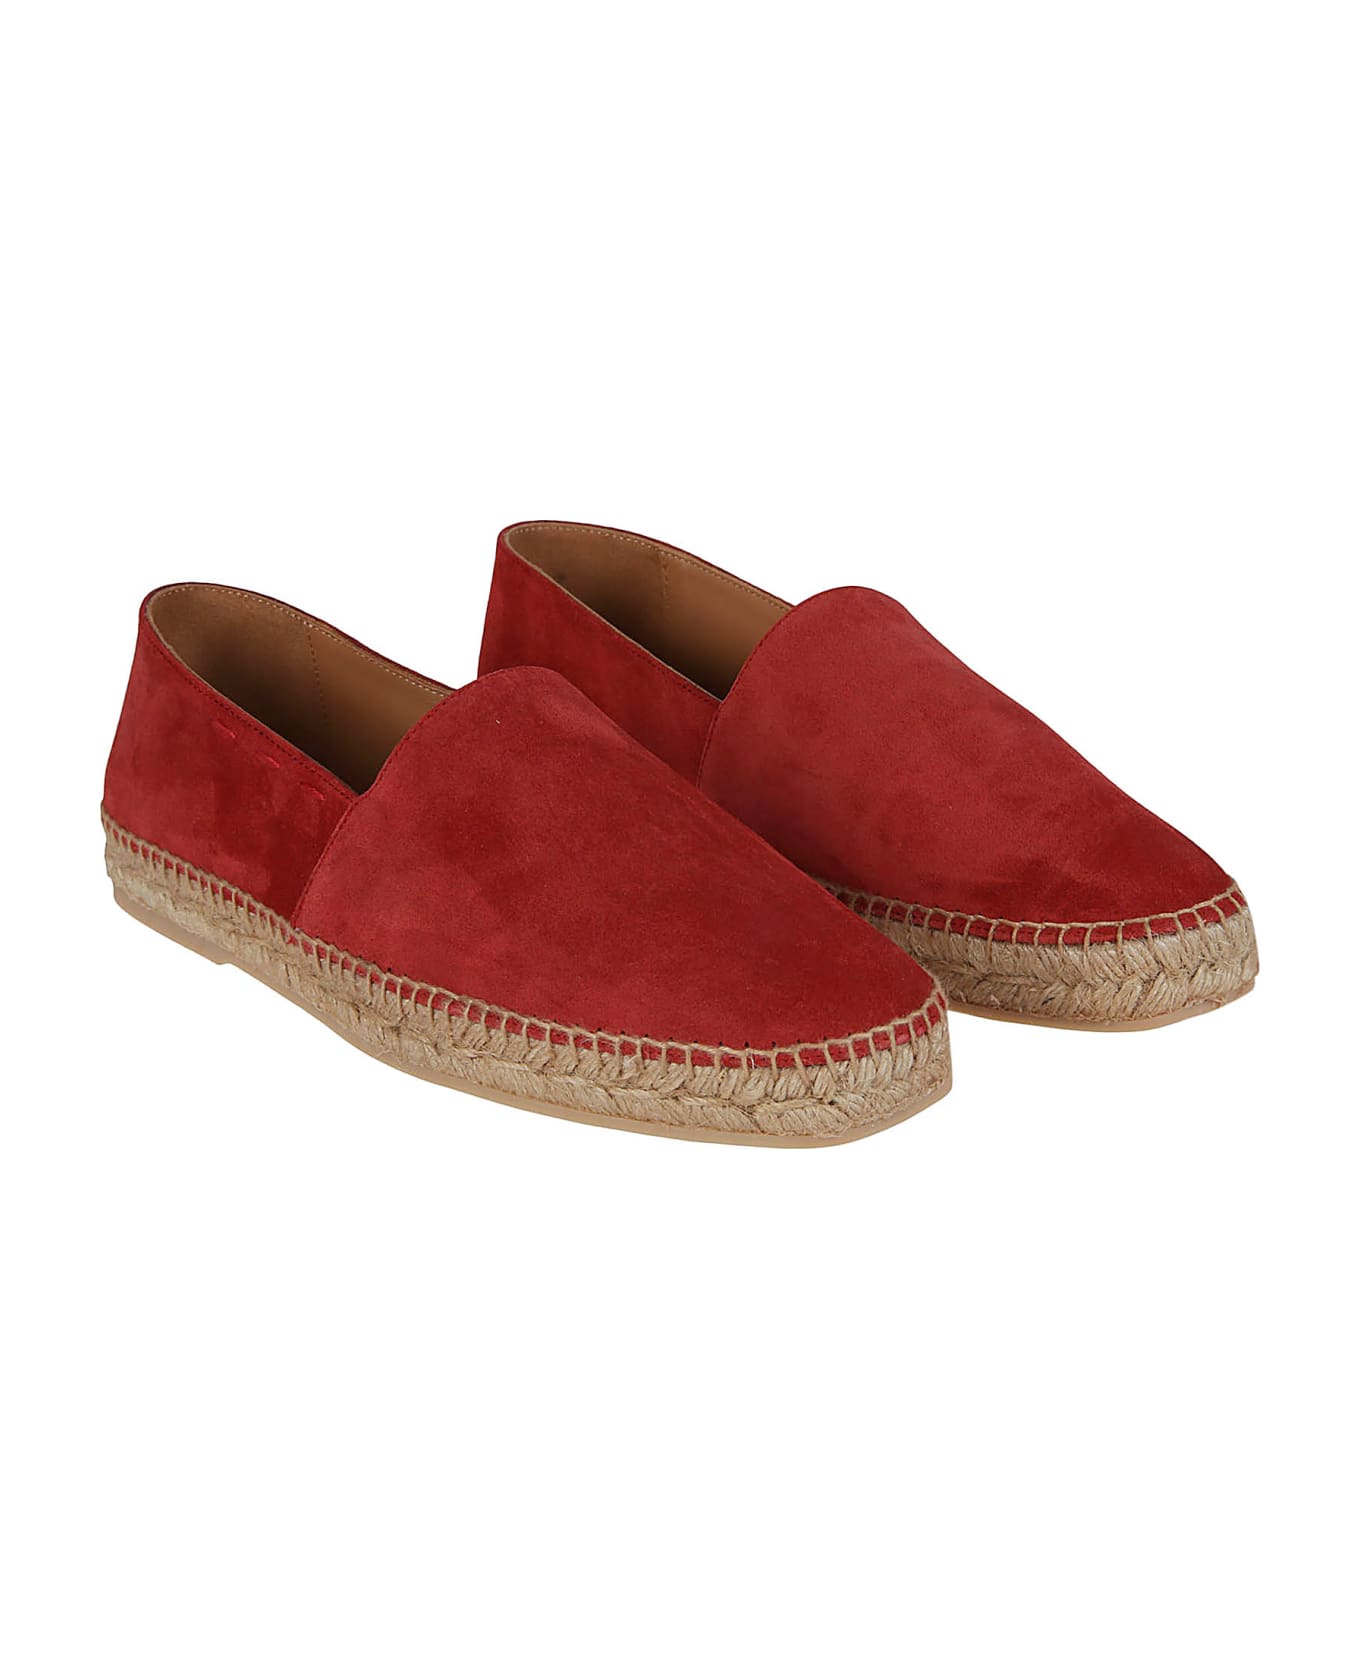 Kiton A048 Espadrilles - Rosso その他各種シューズ